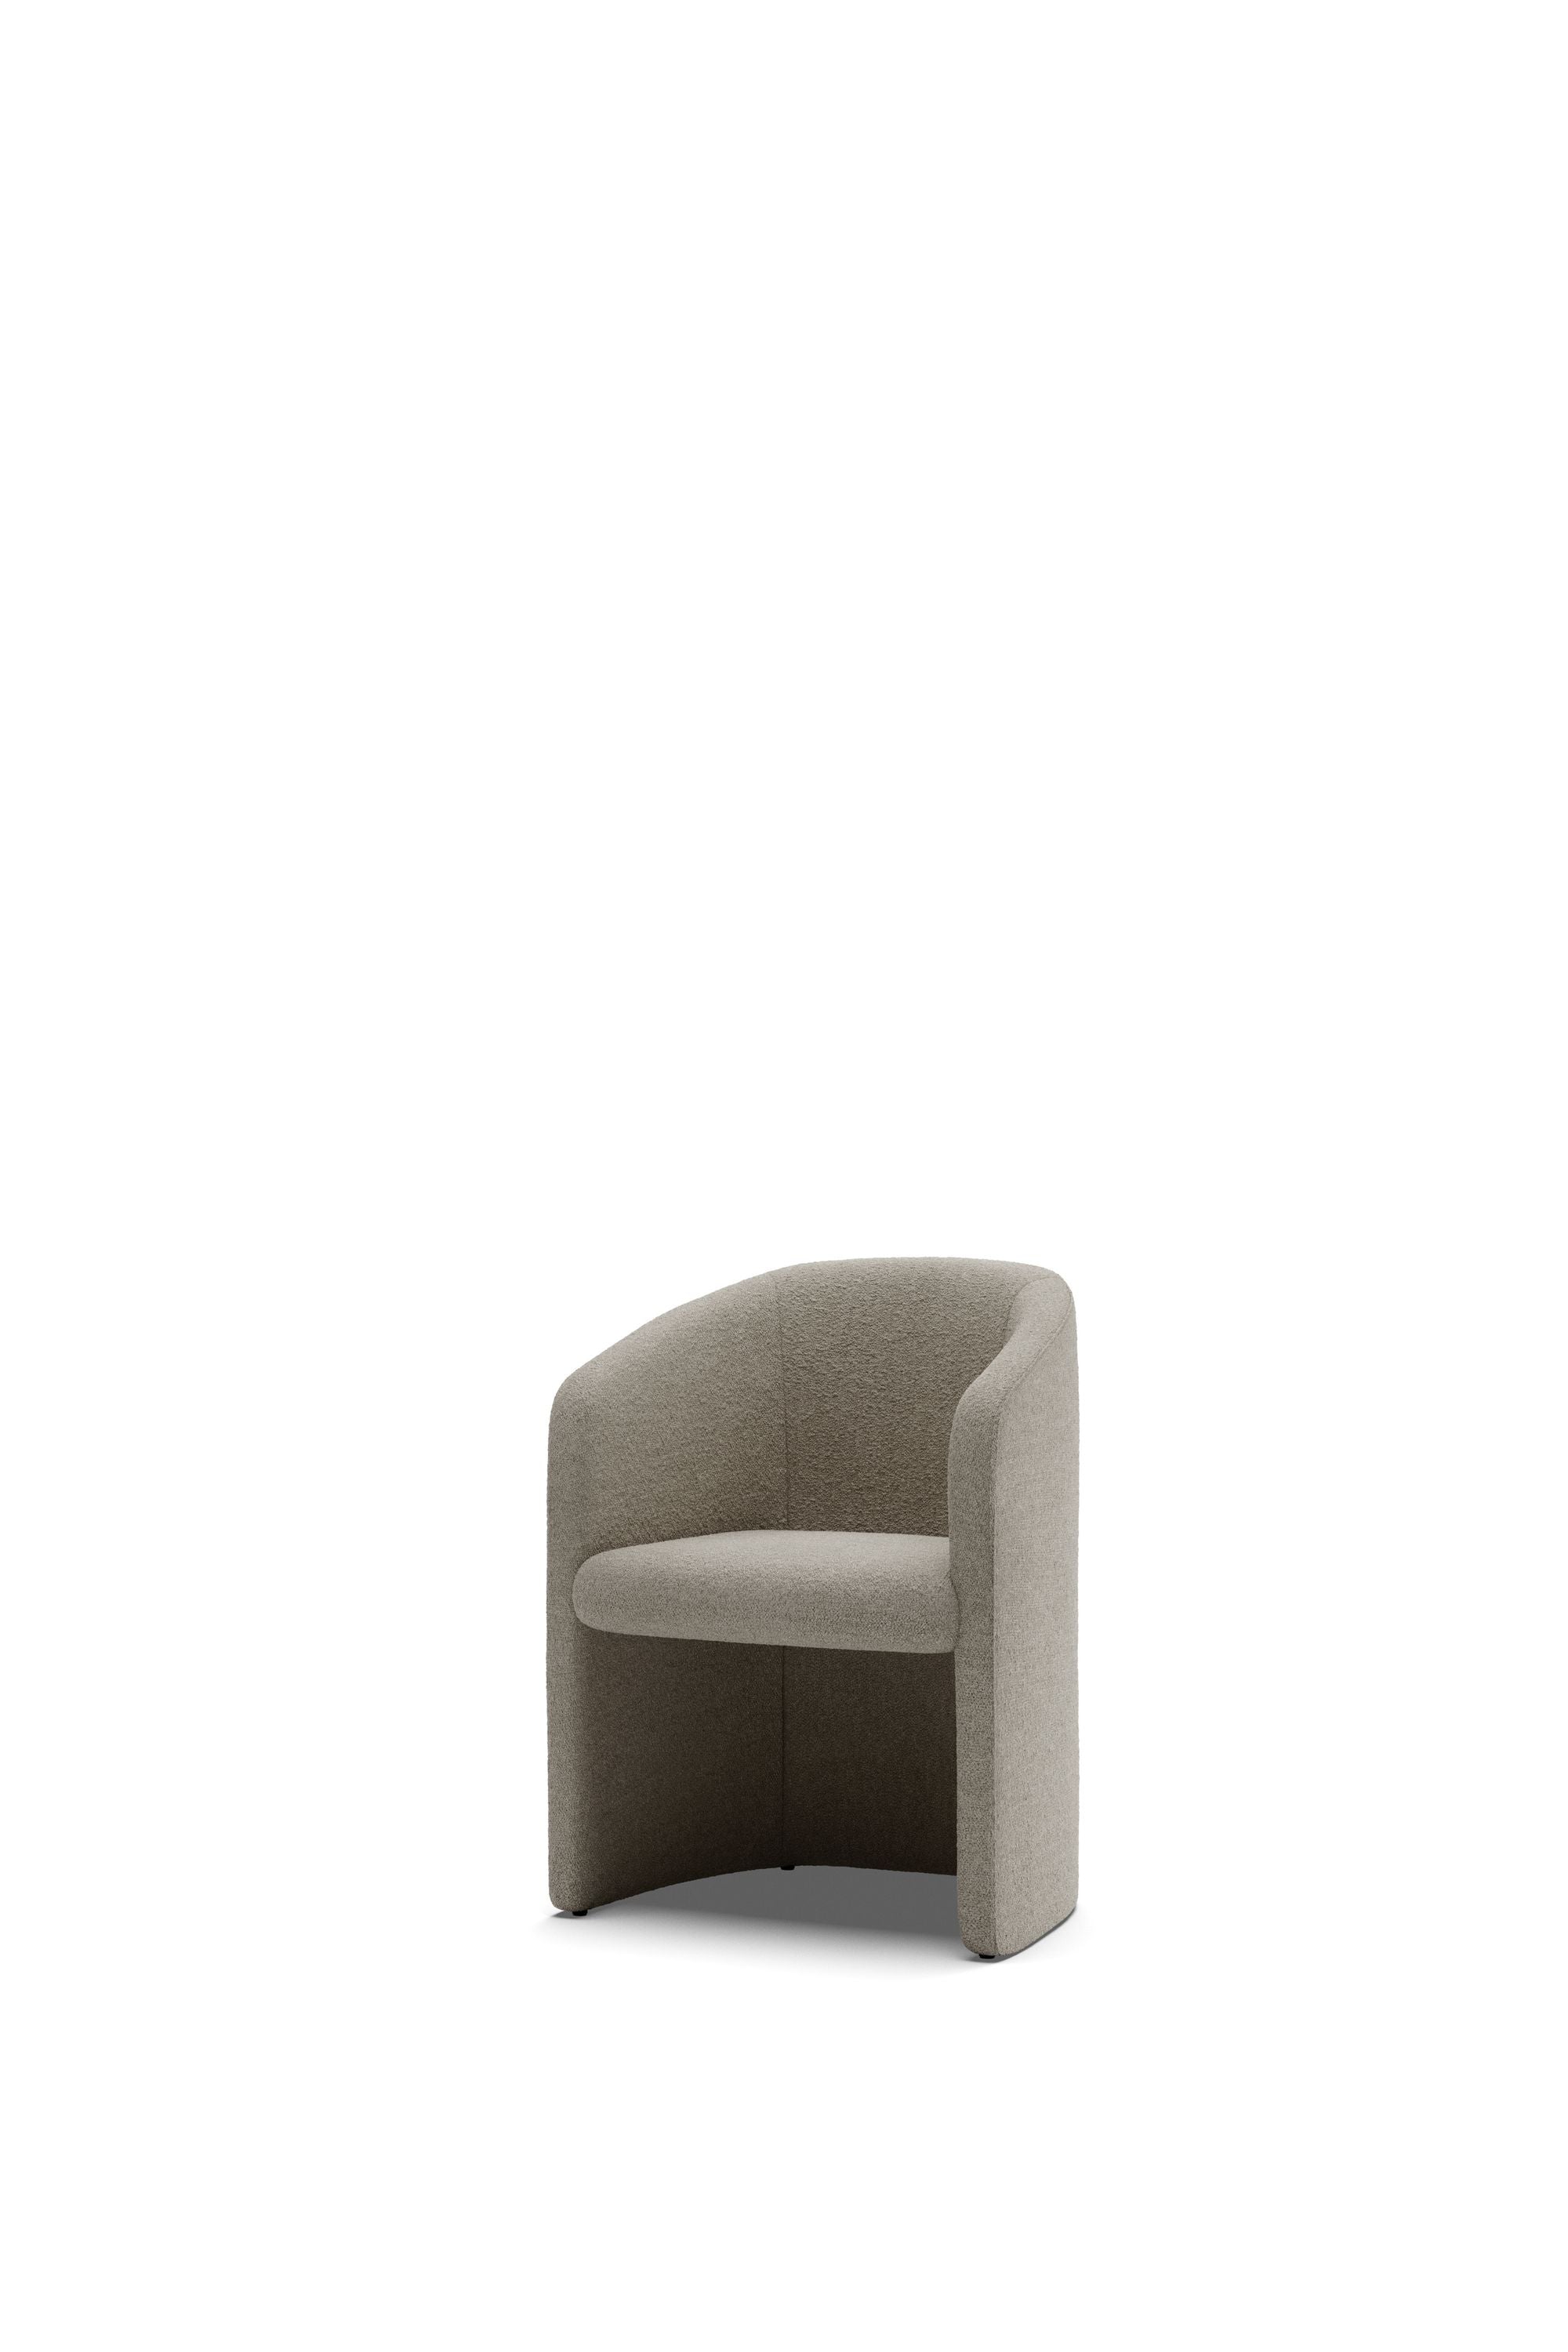 New Works Covent Club Chair, hamp